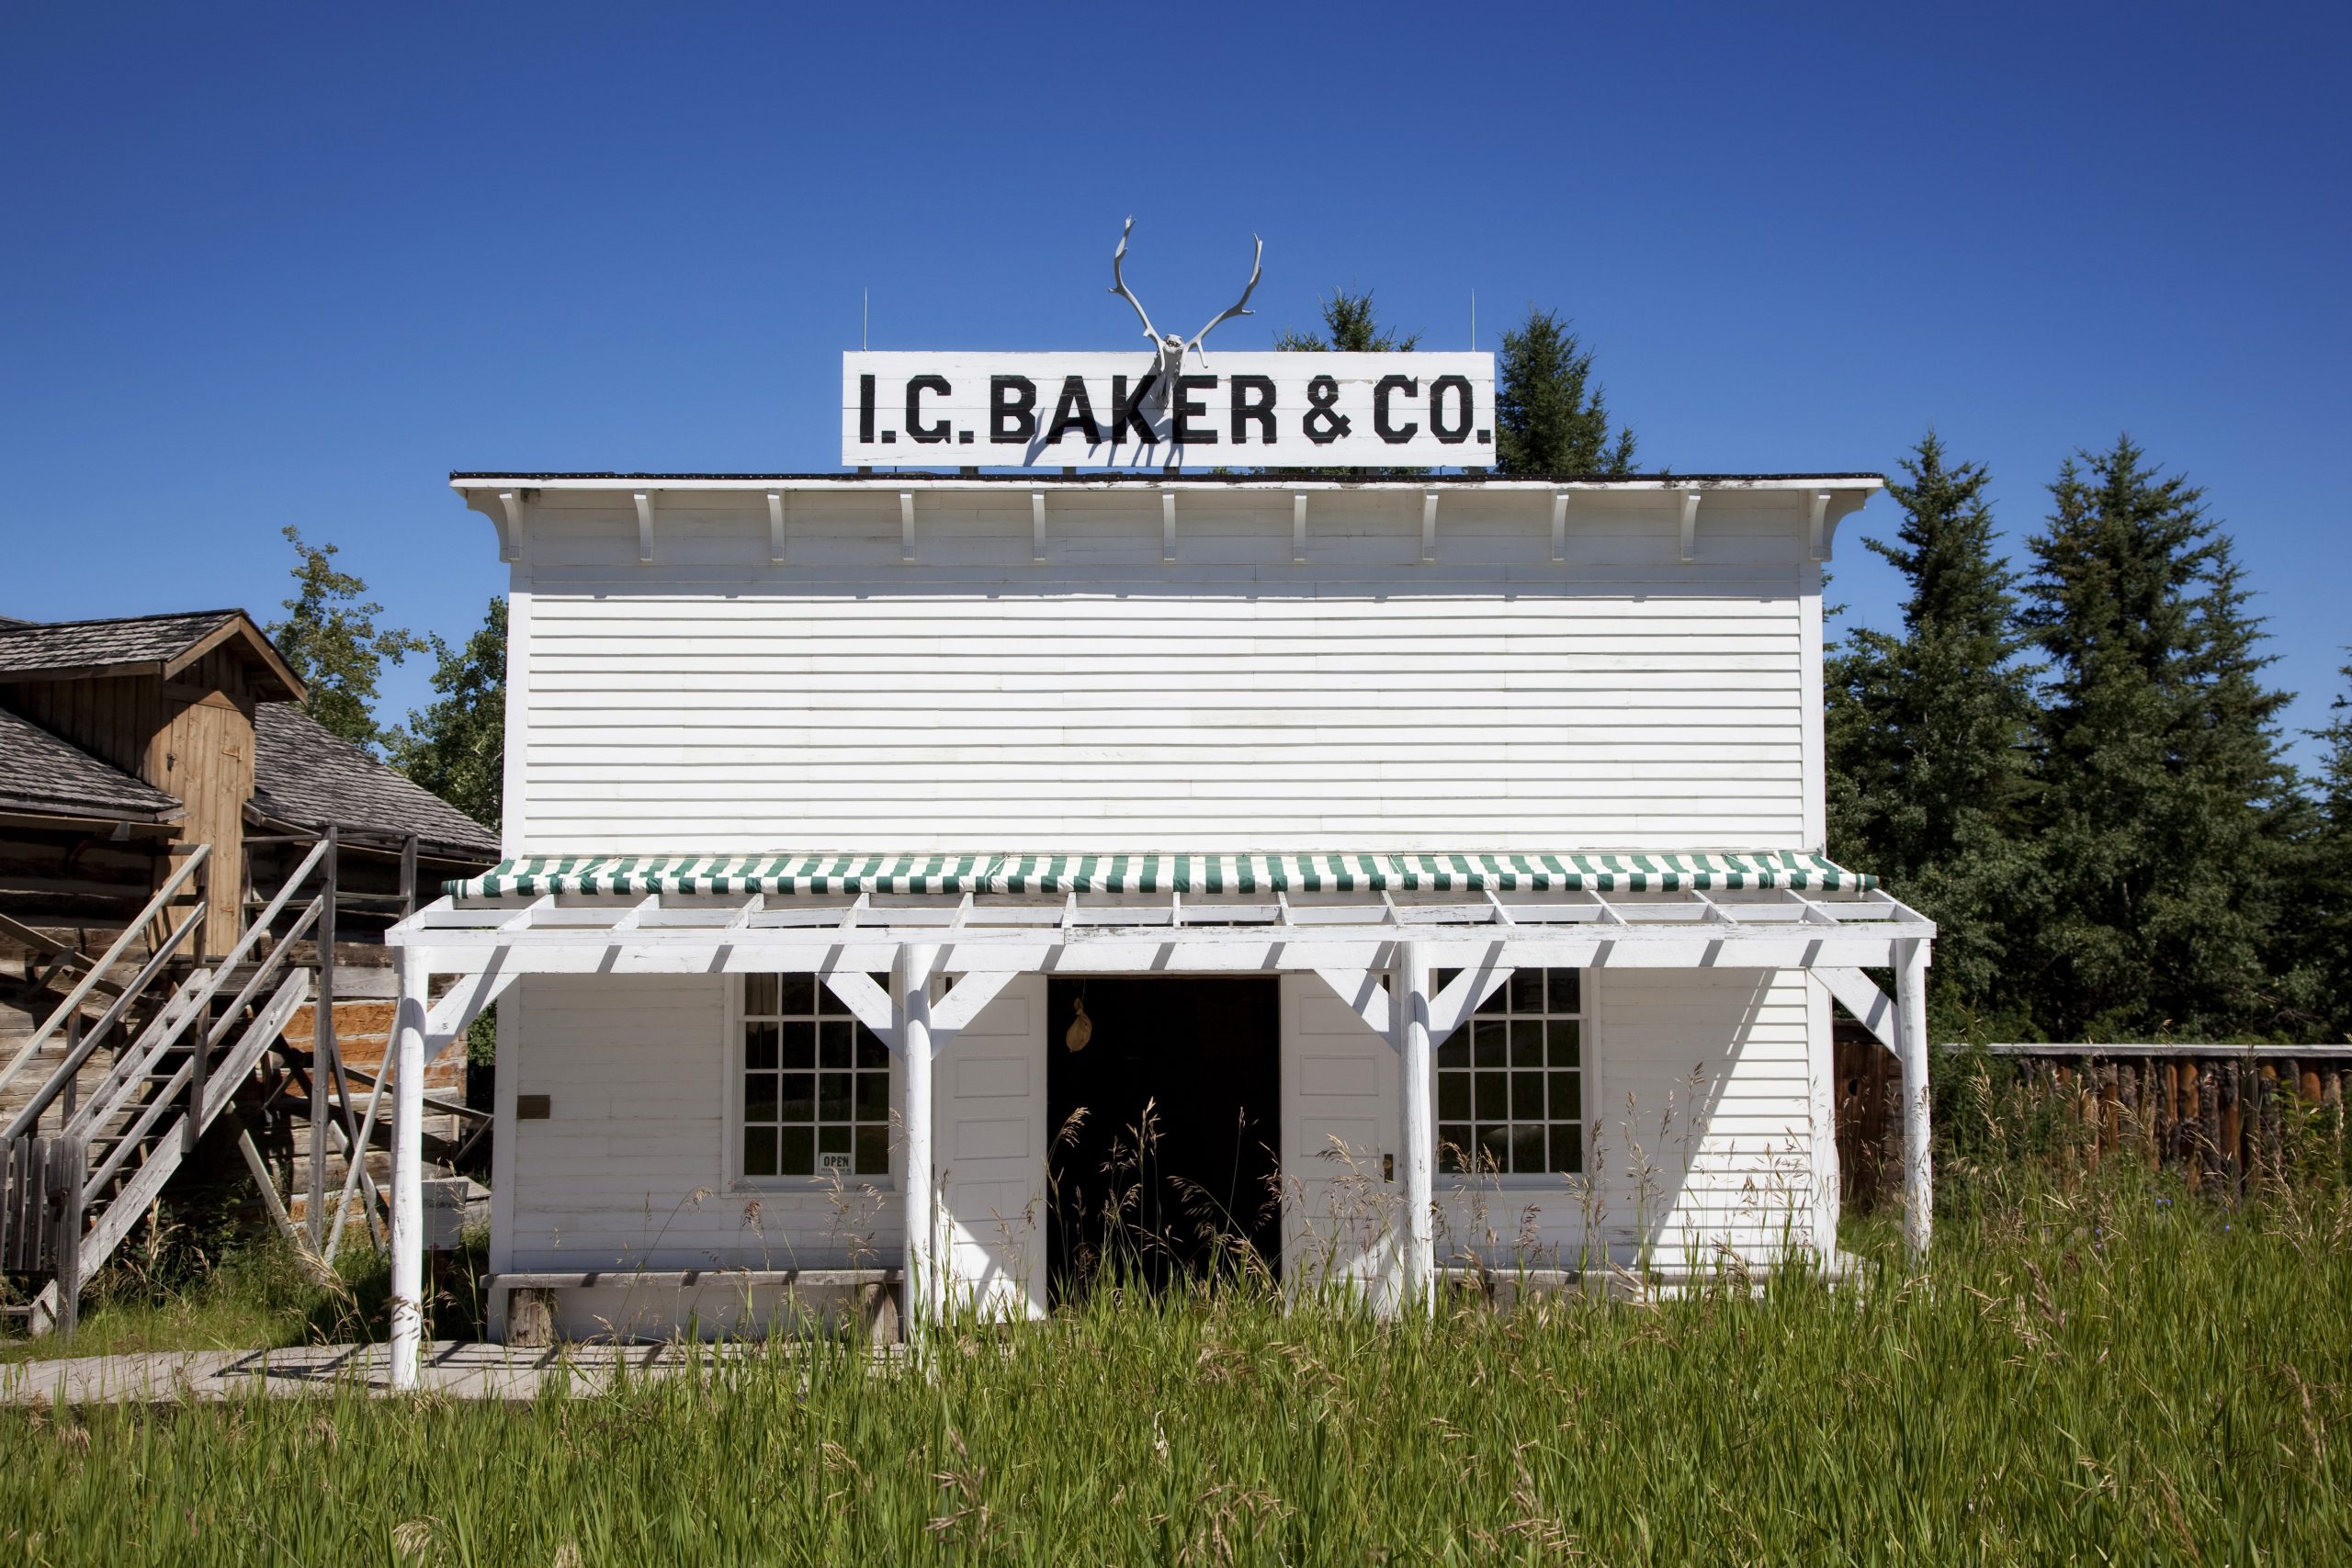 IG Baker and Co. building at Heritage Park